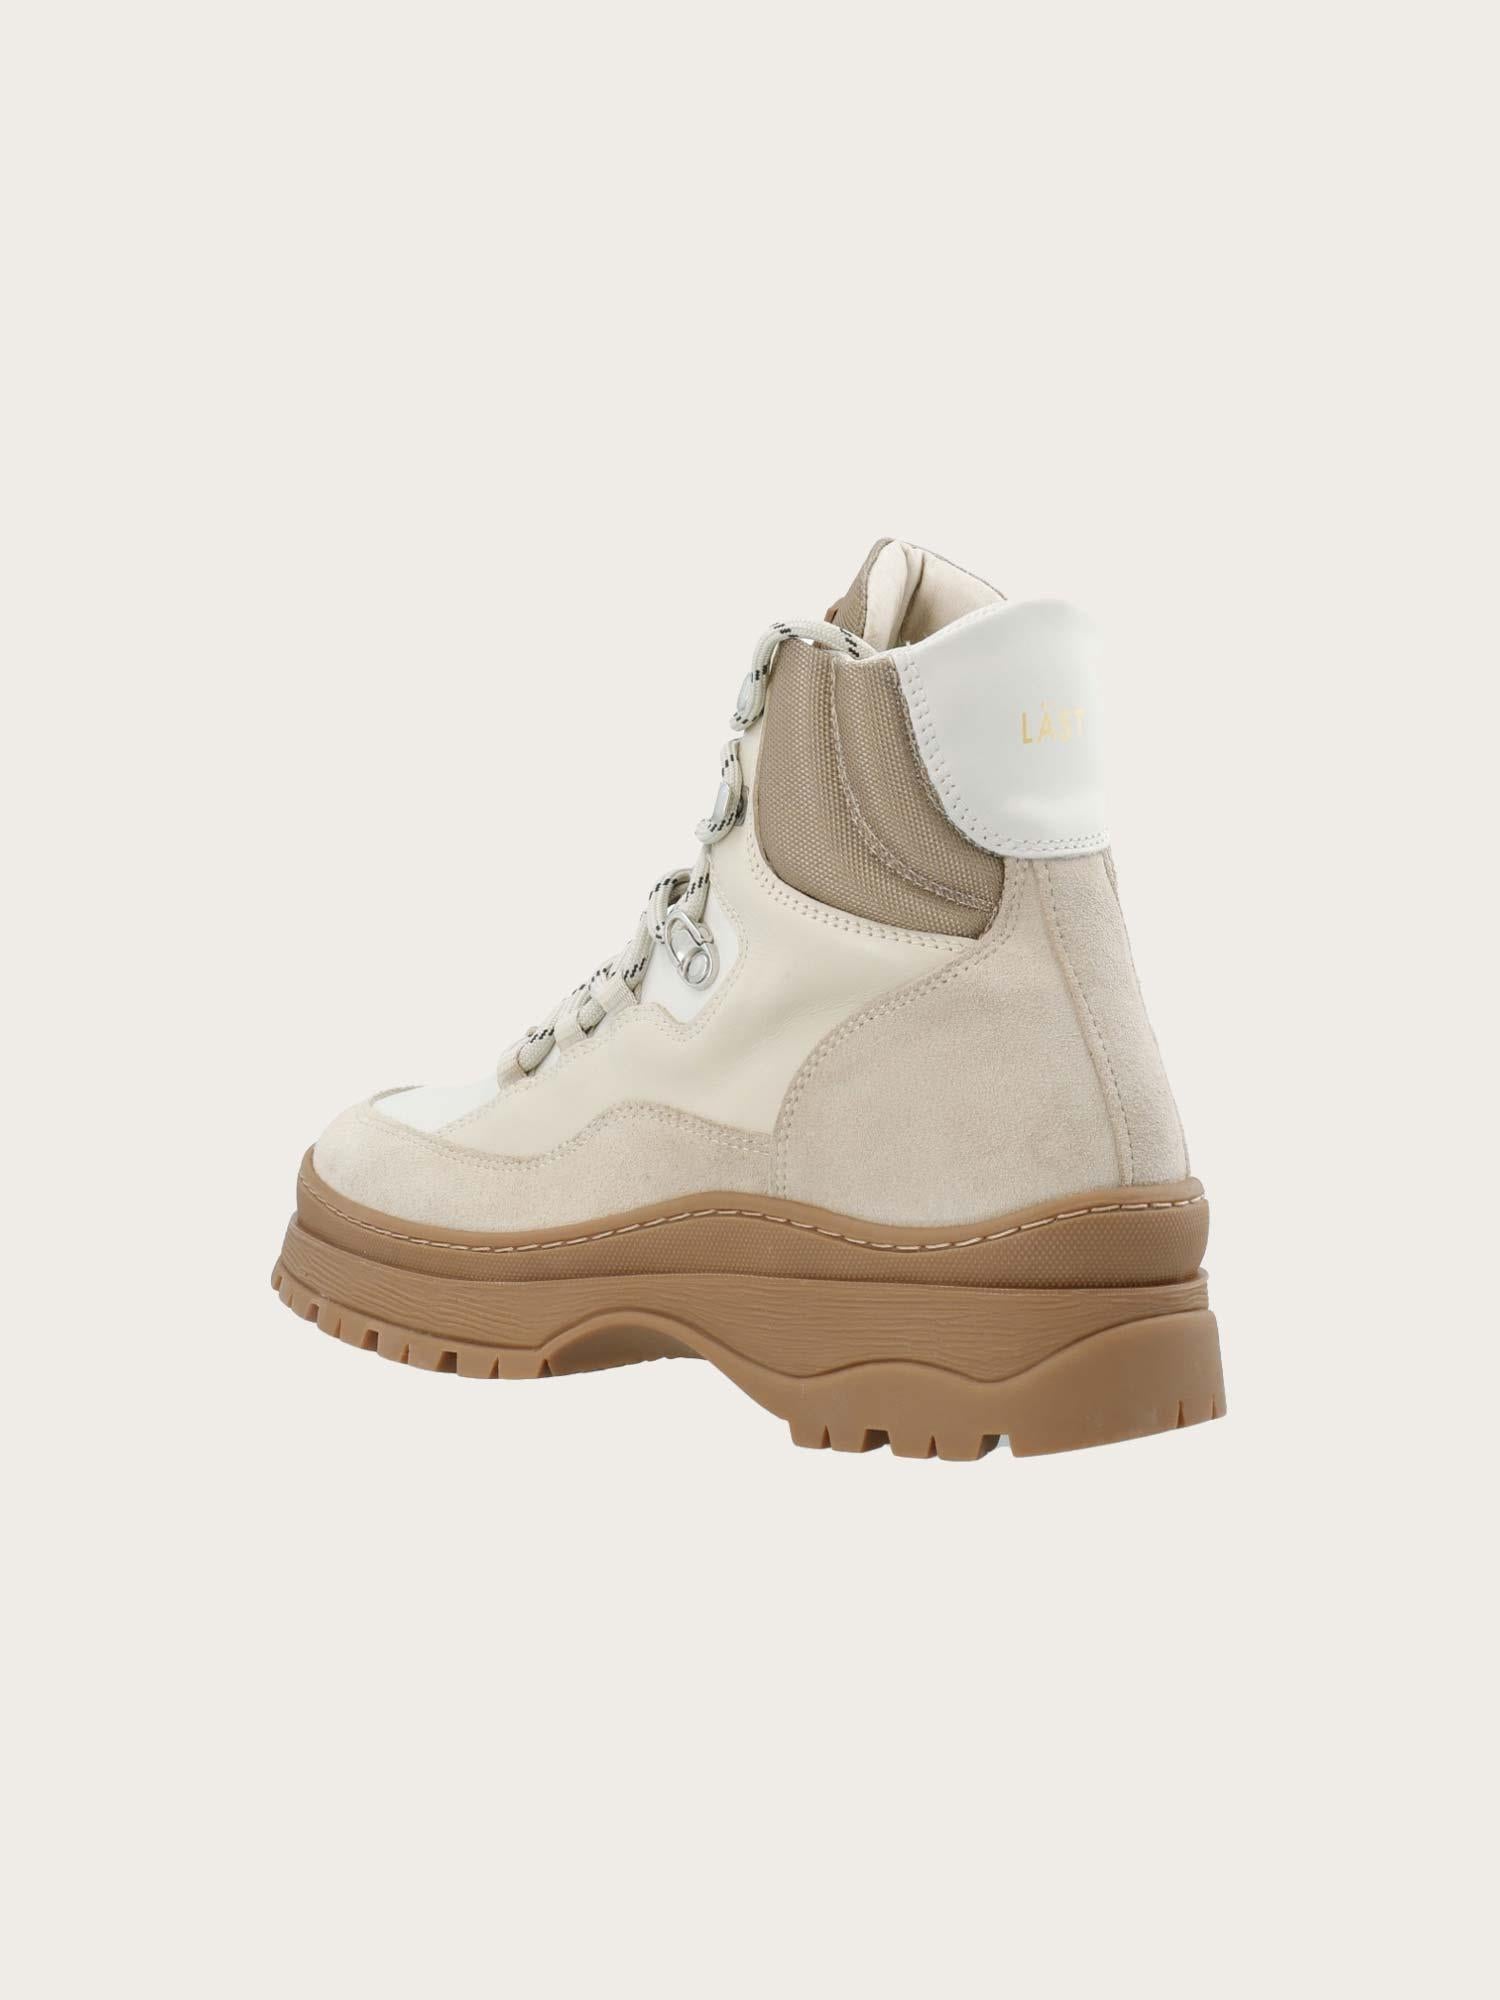 Downhill - Leather/Suede - Beige